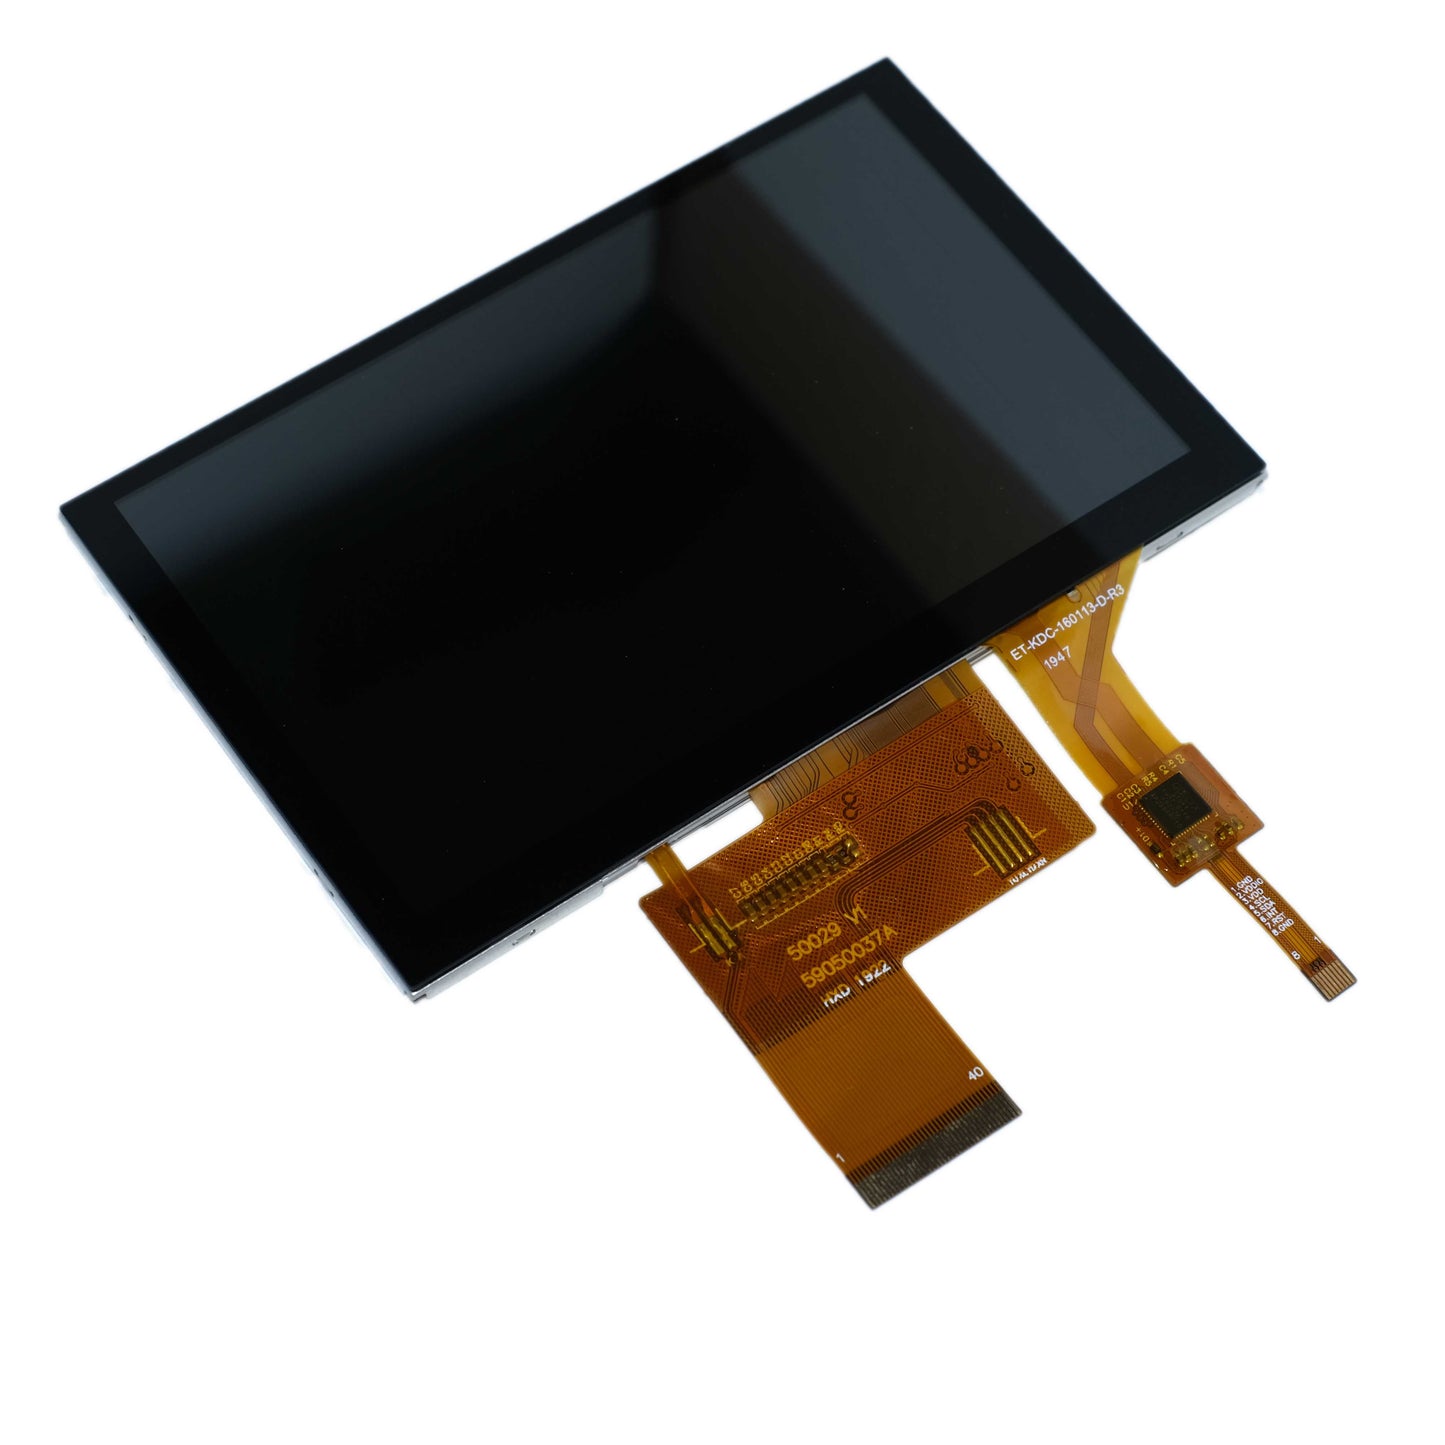 top view of 5.0-inch IPS display with 800x480 resolution